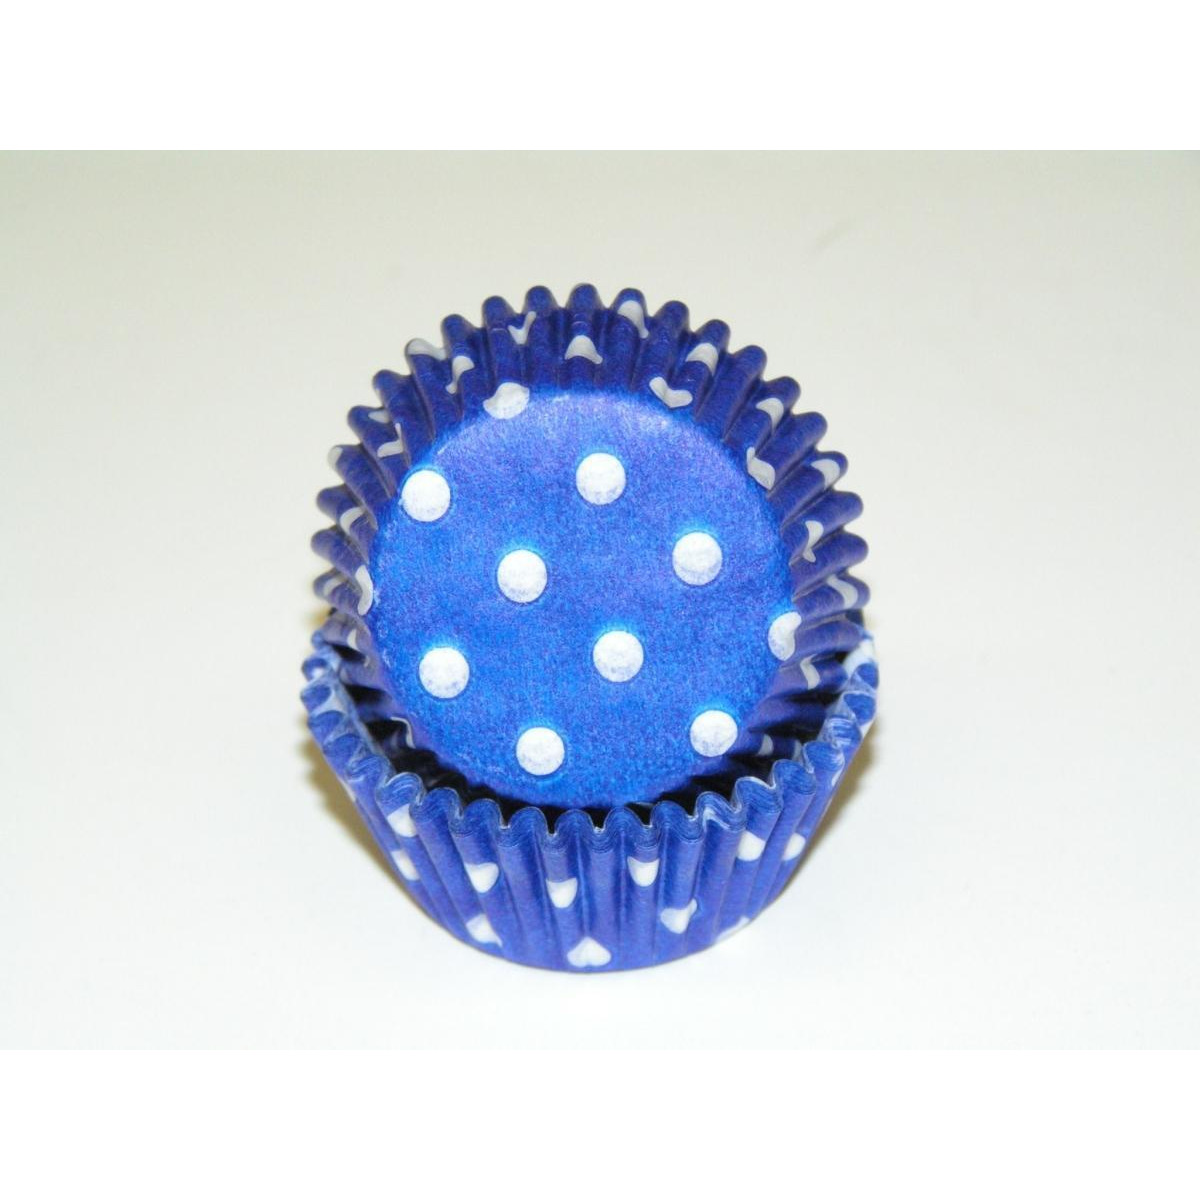 Viking -450C POLKA DOT BLUE 1.25 x 2 in. Greaseproof Baking Cup with Polka Dot Design - Blue - 1000 Piece